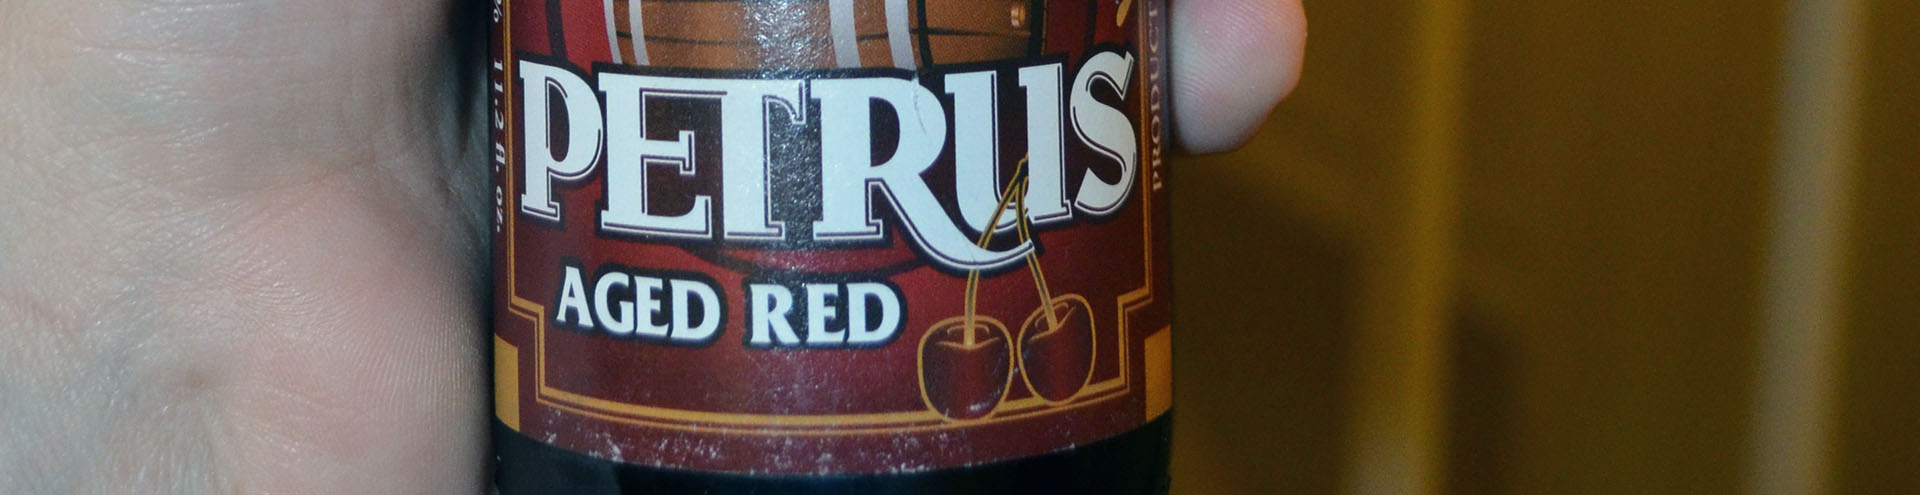 Petrus Aged Red Header